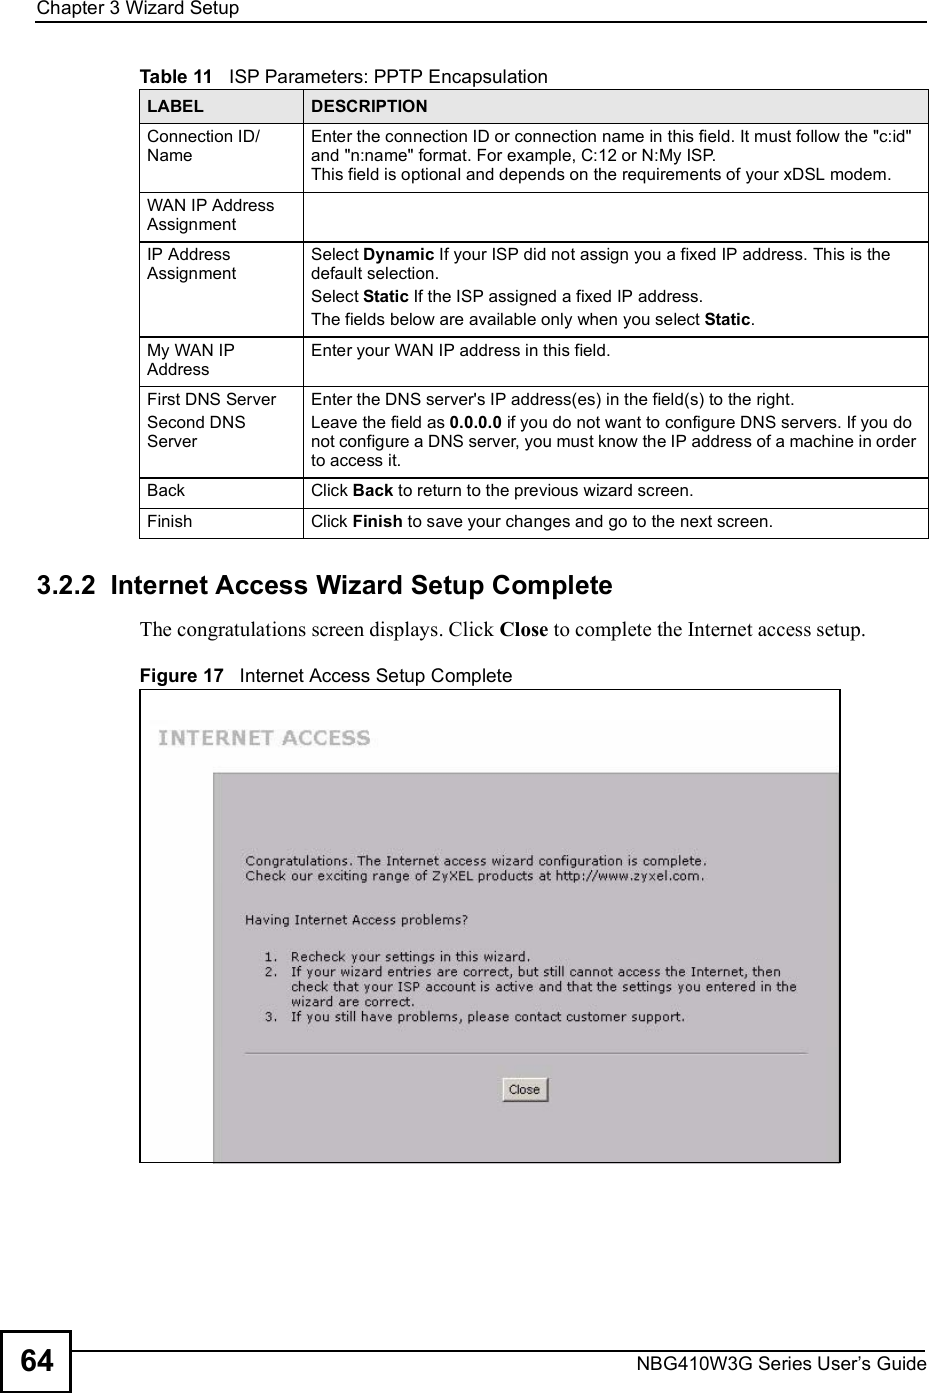 Chapter 3Wizard SetupNBG410W3G Series User s Guide643.2.2  Internet Access Wizard Setup CompleteThe congratulations screen displays. Click Close to complete the Internet access setup.Figure 17   Internet Access Setup CompleteConnection ID/NameEnter the connection ID or connection name in this field. It must follow the &quot;c:id&quot; and &quot;n:name&quot; format. For example, C:12 or N:My ISP. This field is optional and depends on the requirements of your xDSL modem. WAN IP Address Assignment IP Address Assignment Select Dynamic If your ISP did not assign you a fixed IP address. This is the default selection. Select Static If the ISP assigned a fixed IP address.The fields below are available only when you select Static.My WAN IP AddressEnter your WAN IP address in this field. First DNS ServerSecond DNS ServerEnter the DNS server&apos;s IP address(es) in the field(s) to the right.Leave the field as 0.0.0.0 if you do not want to configure DNS servers. If you do not configure a DNS server, you must know the IP address of a machine in order to access it.BackClick Back to return to the previous wizard screen.FinishClick Finish to save your changes and go to the next screen. Table 11   ISP Parameters: PPTP EncapsulationLABEL DESCRIPTION